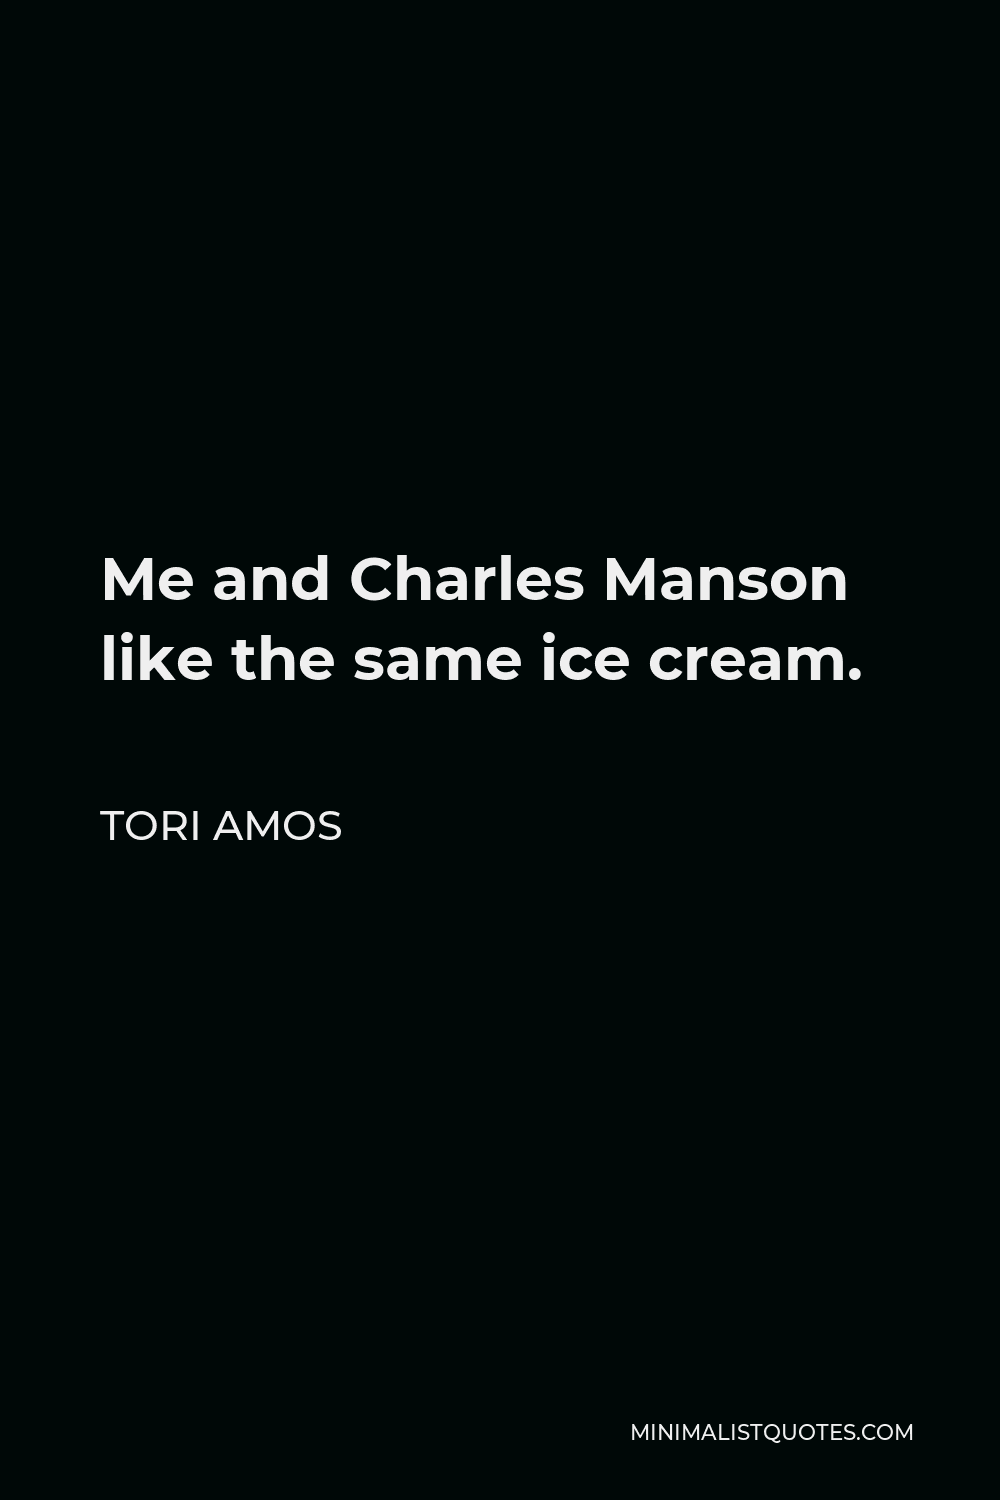 Tori Amos Quote - Me and Charles Manson like the same ice cream.